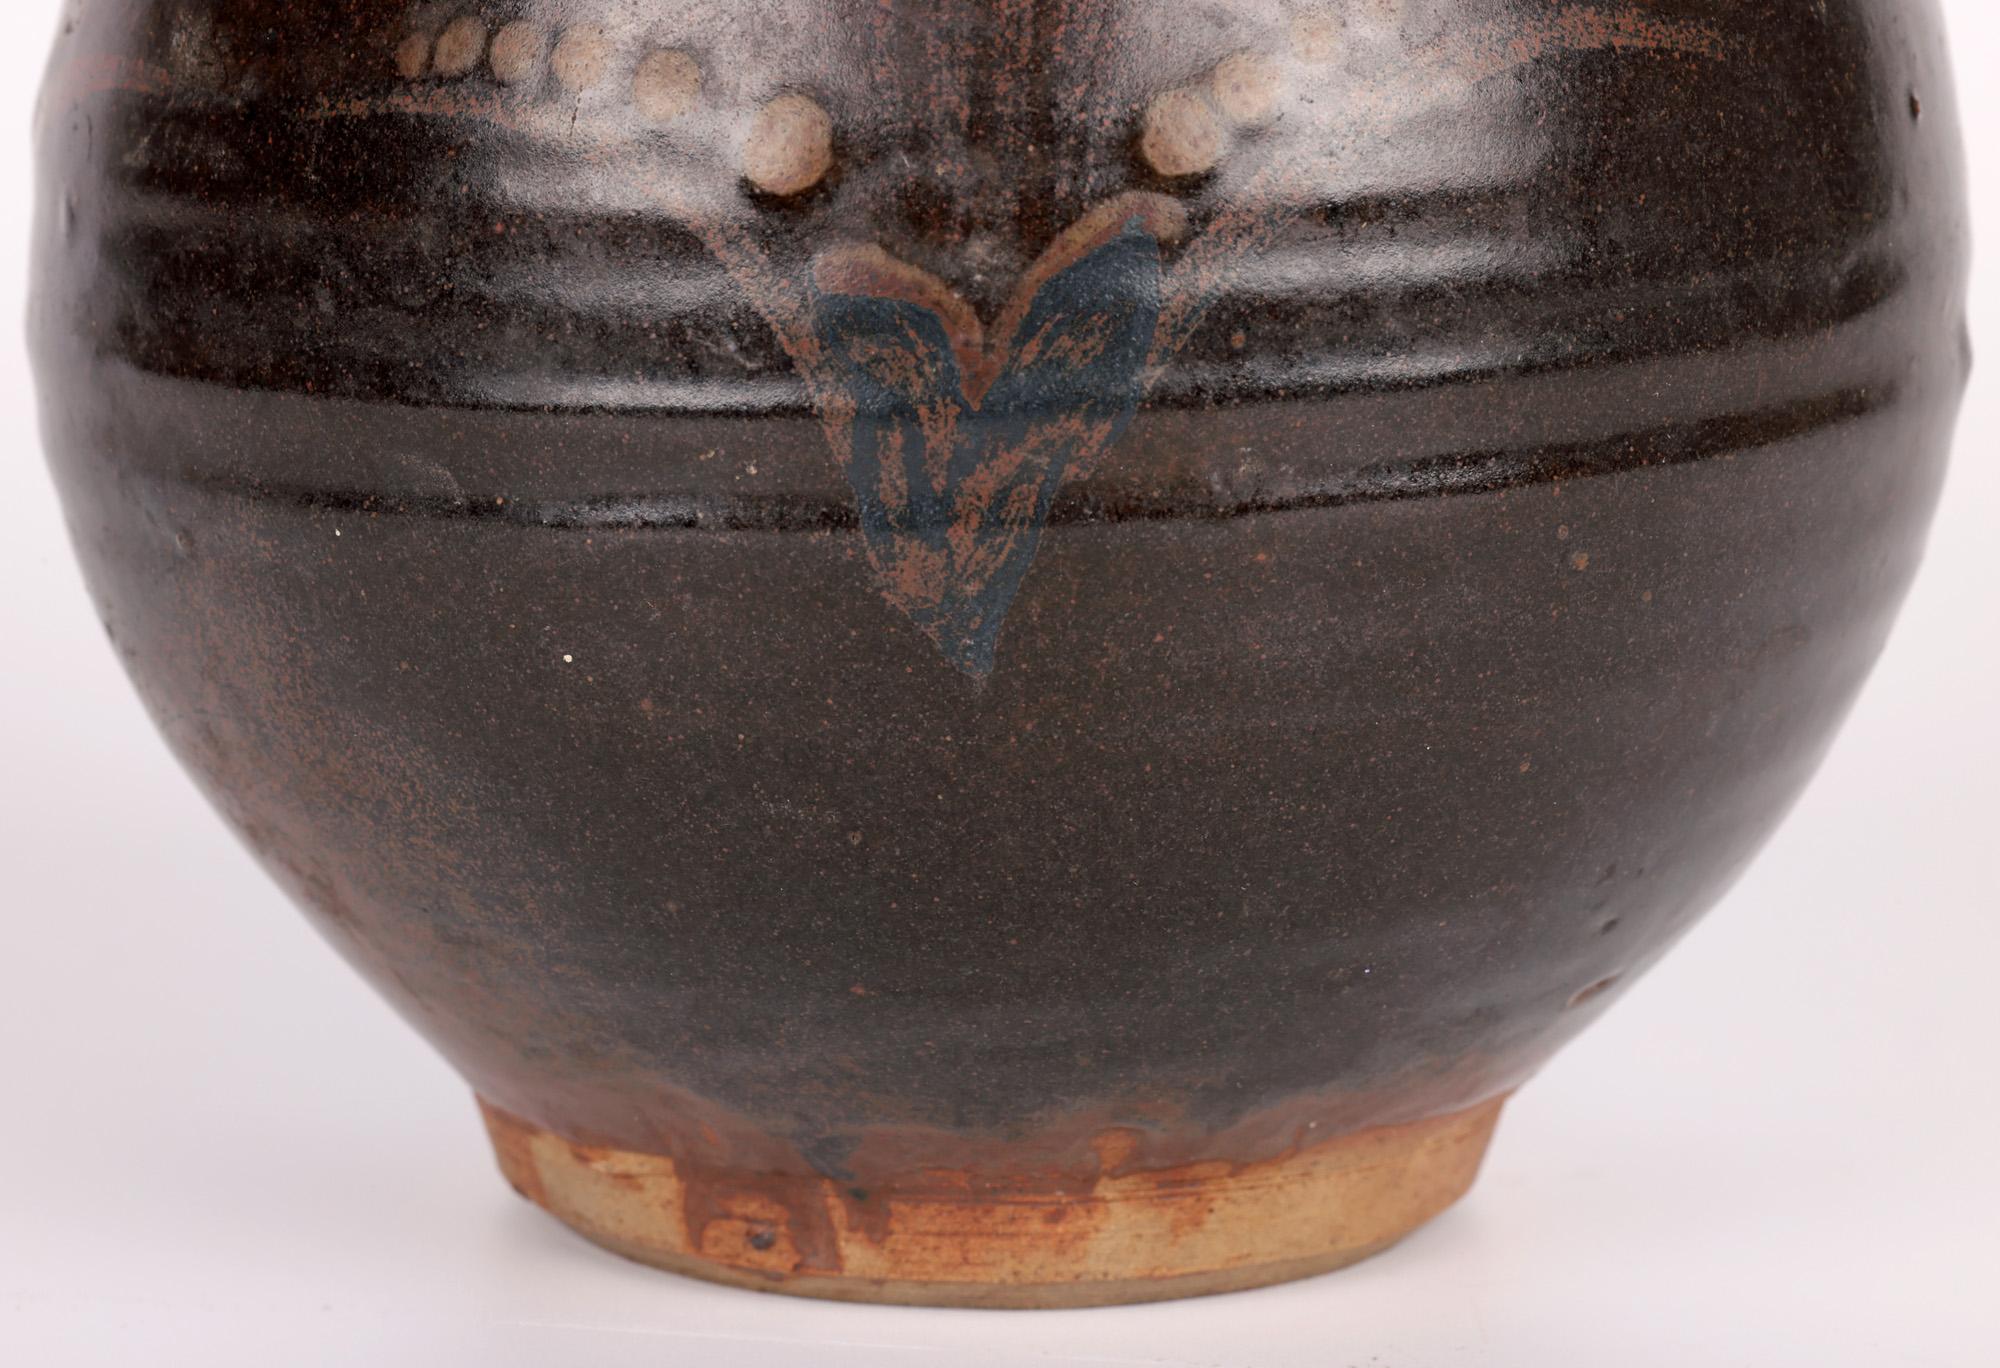 English David Leach Attributed Early Leach Pottery Foxglove Pattern Vase For Sale